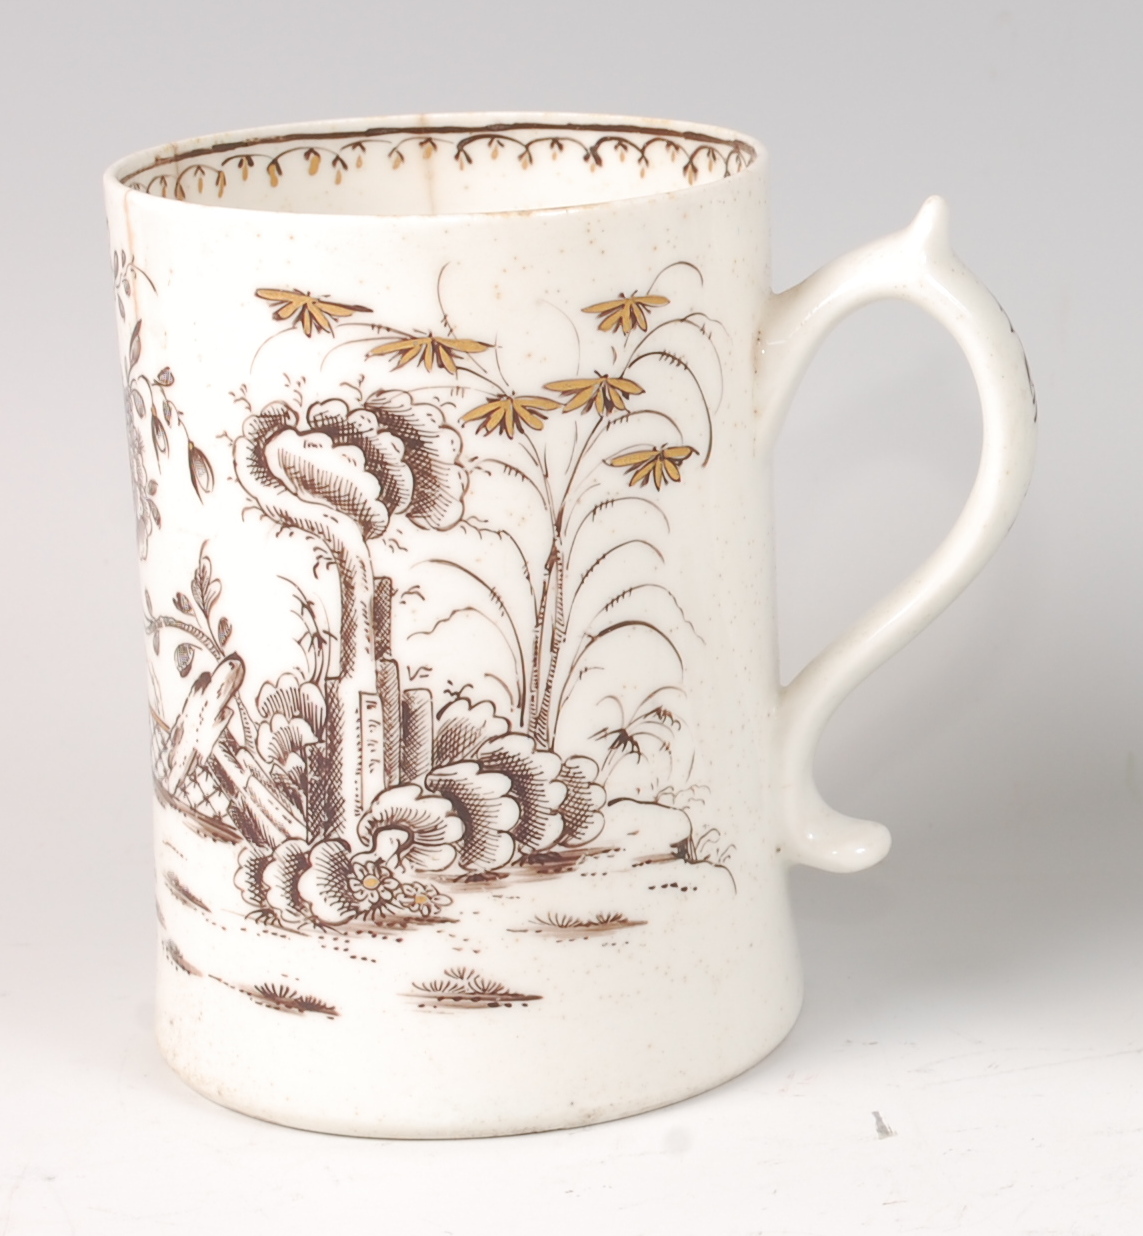 A Lowestoft porcelain tankard, circa 1770, with black pencil sepia and gilt highlighted decoration - Image 3 of 3